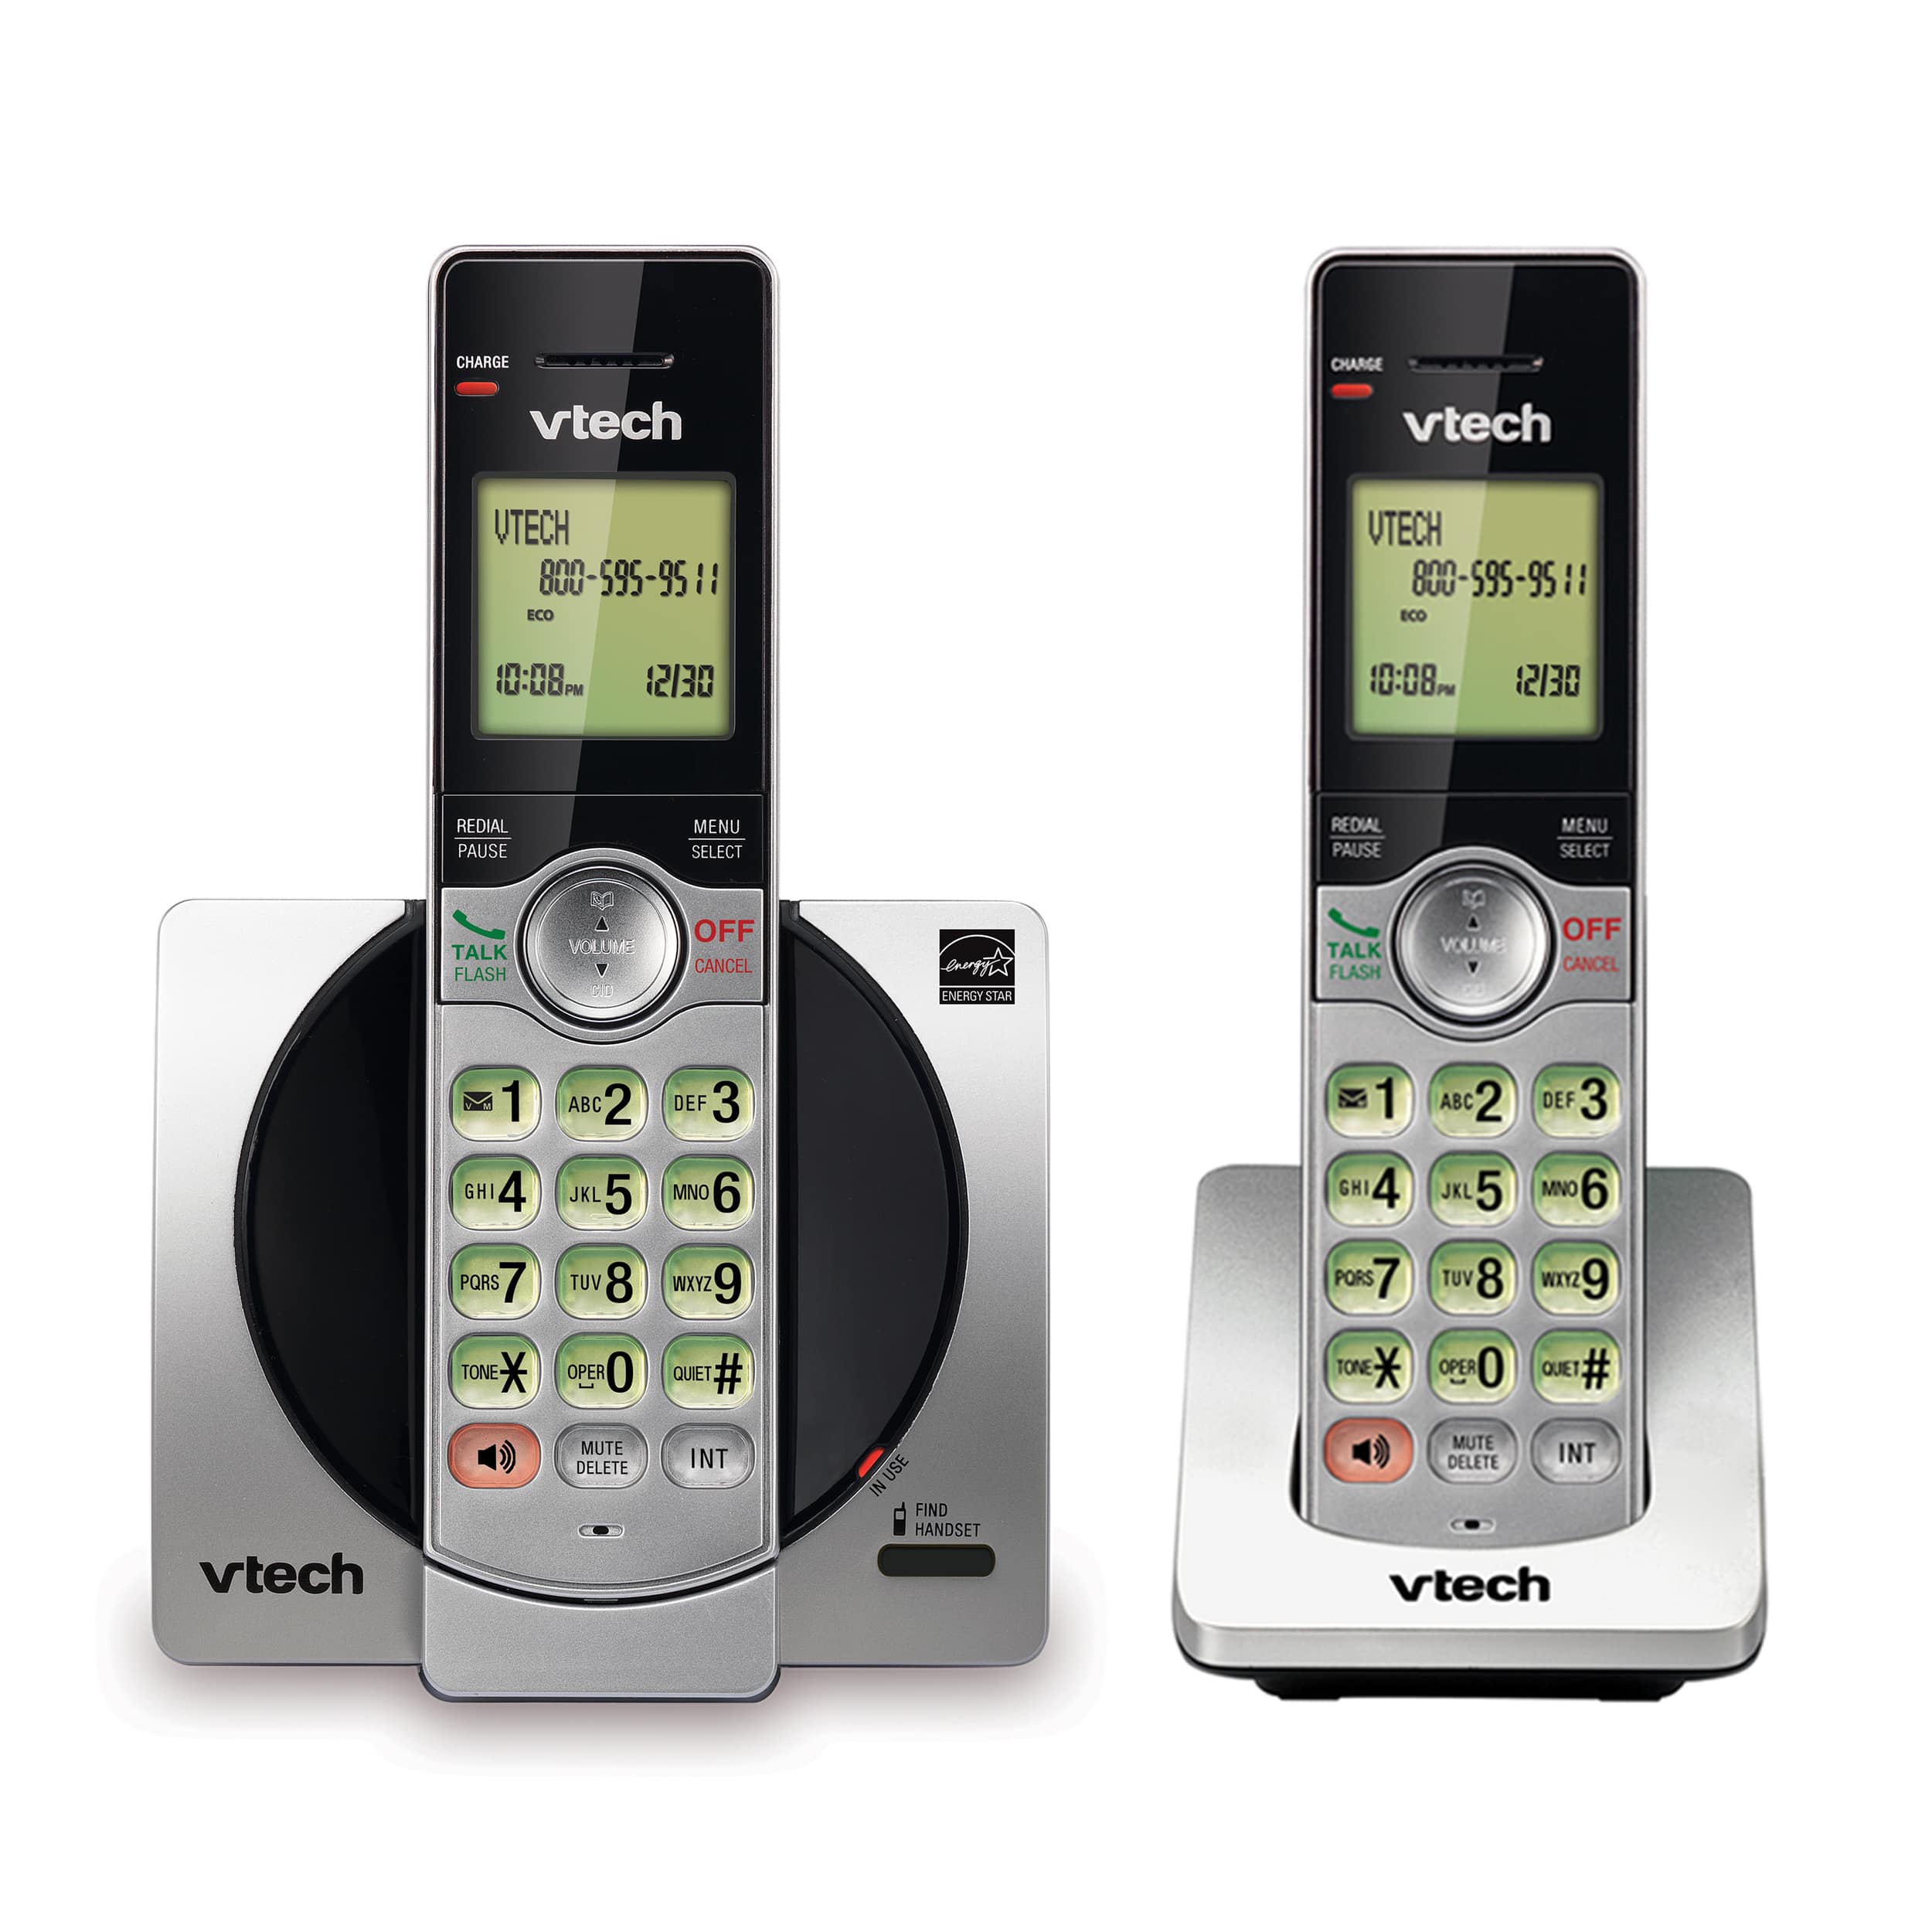 2 Handset Cordless Phone with Caller ID/Call Waiting - view 1